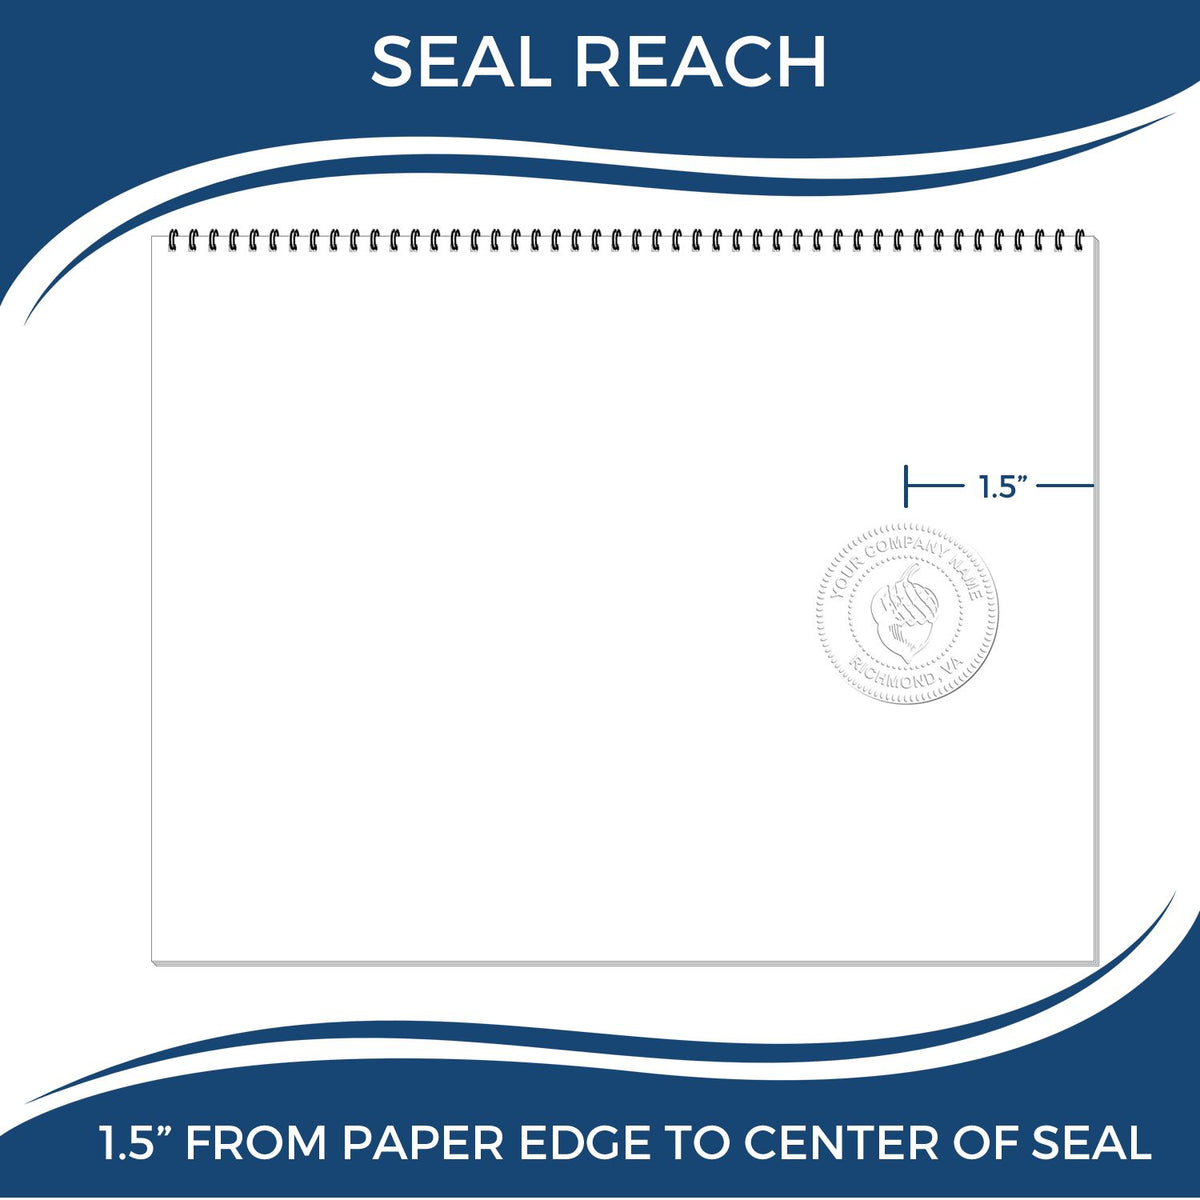 An infographic showing the seal reach which is represented by a ruler and a miniature seal image of the New Hampshire Geologist Desk Seal